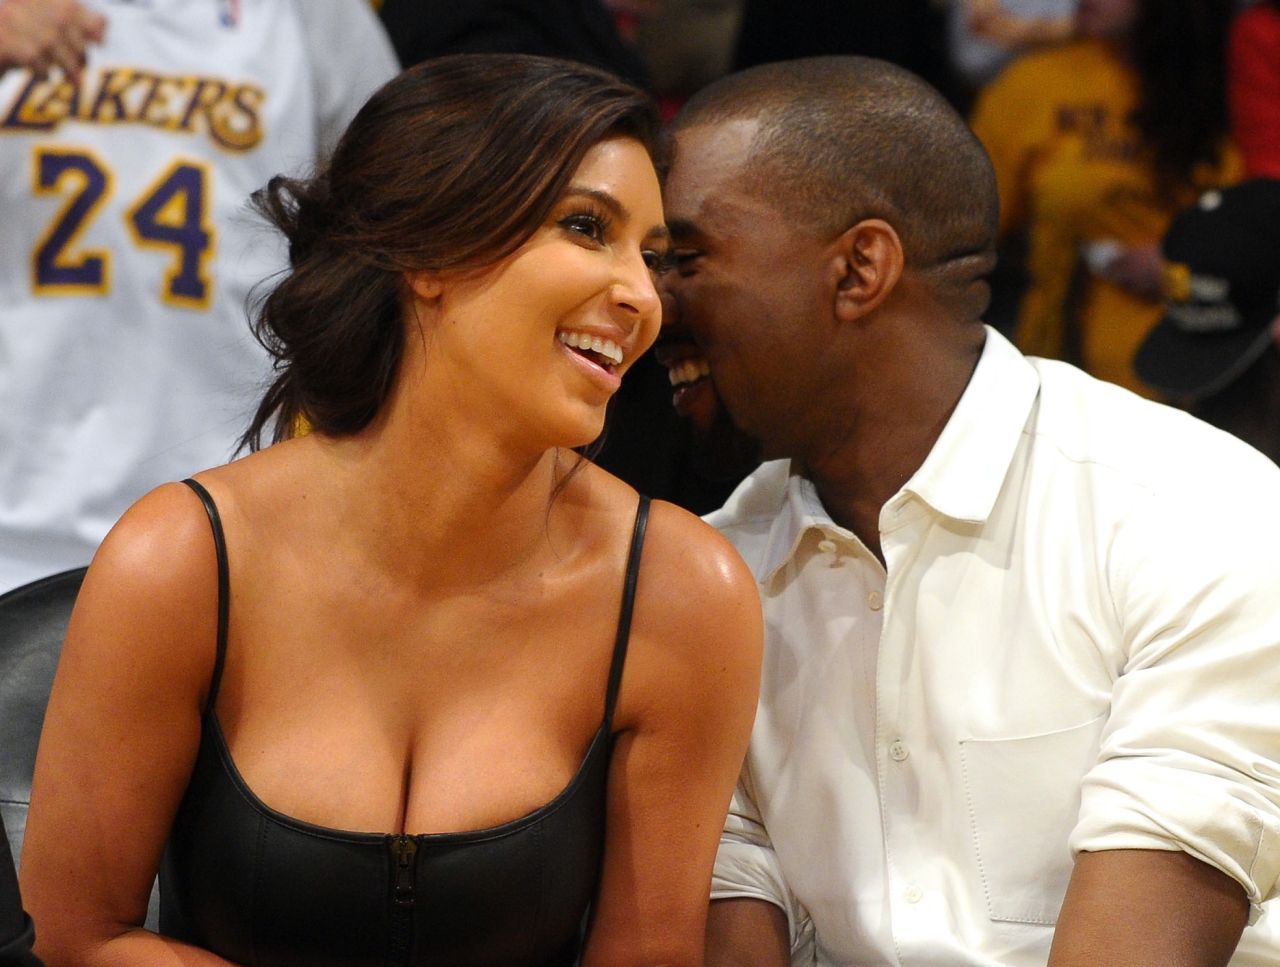 Kim Kardashian and Kanye West are the proud parents of a girl named North. Full name: North West. Yep.